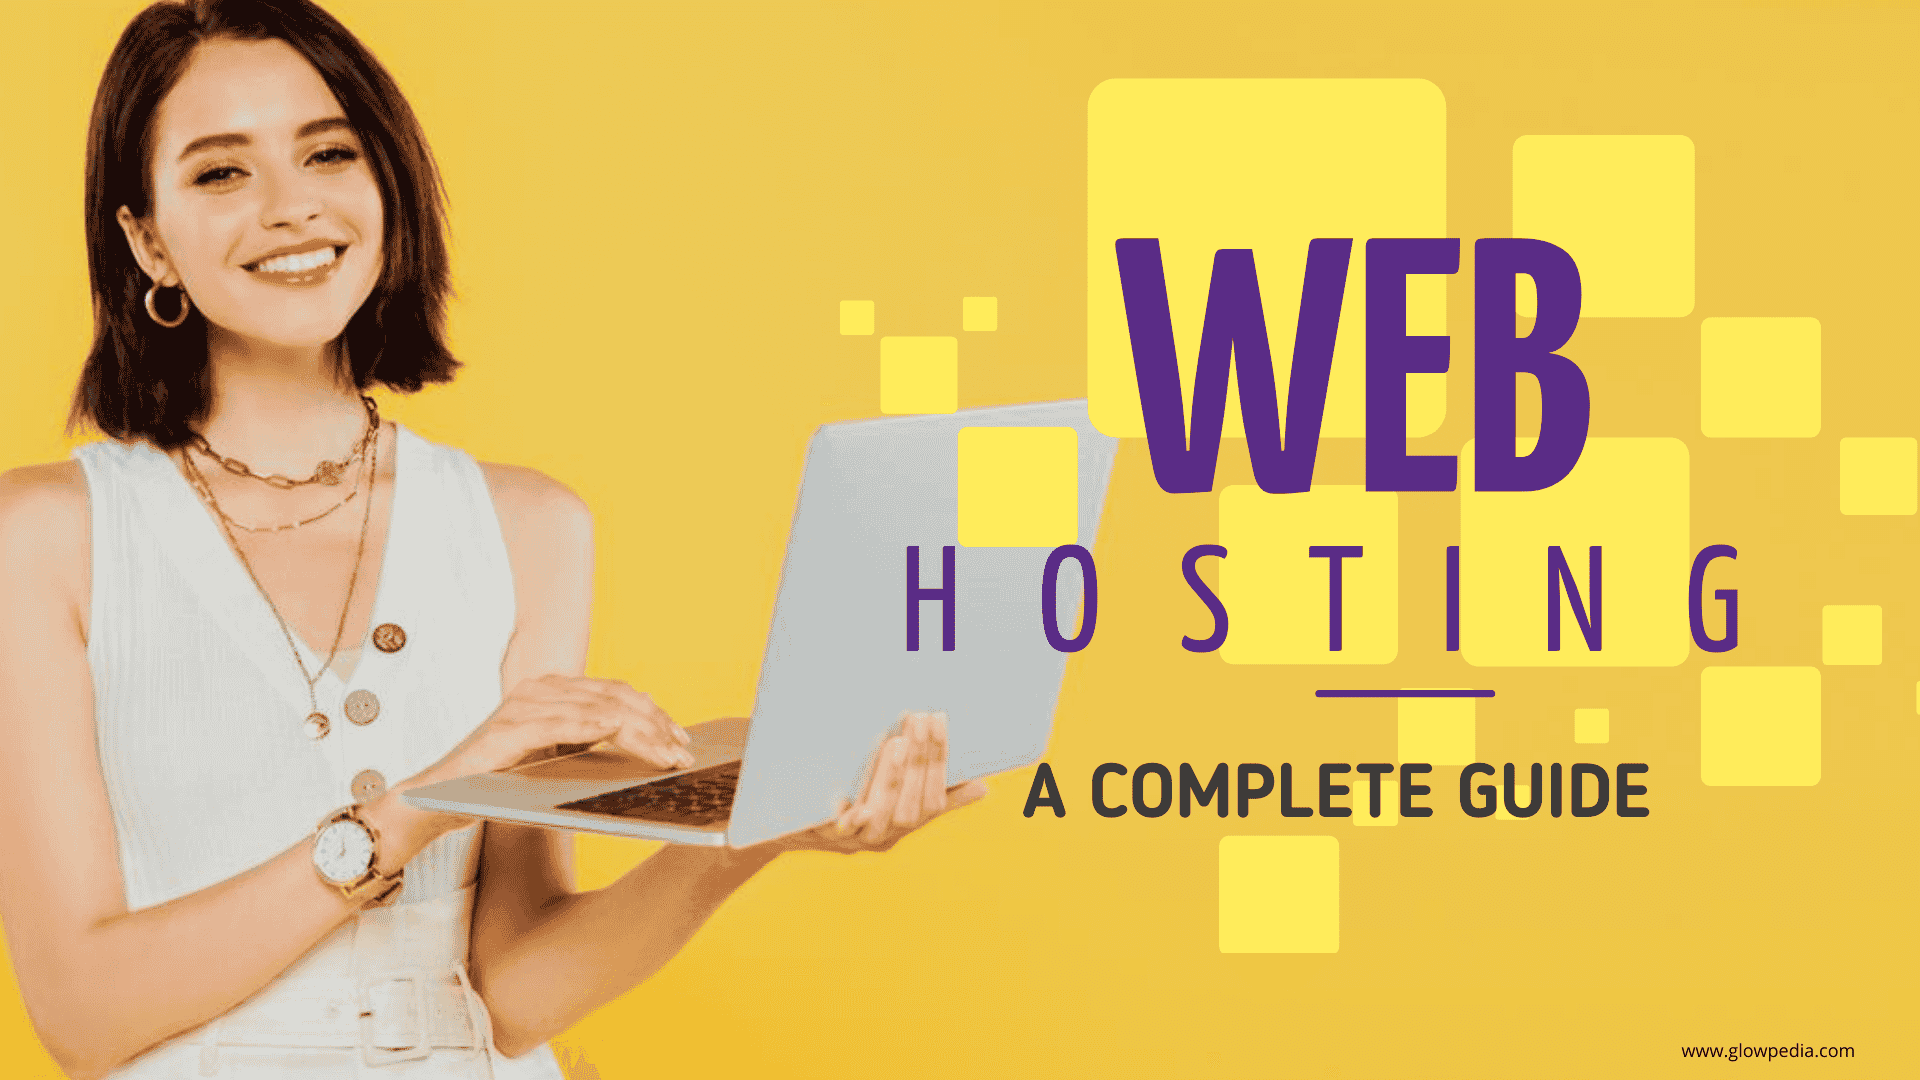 Complete Guide to Website Hosting